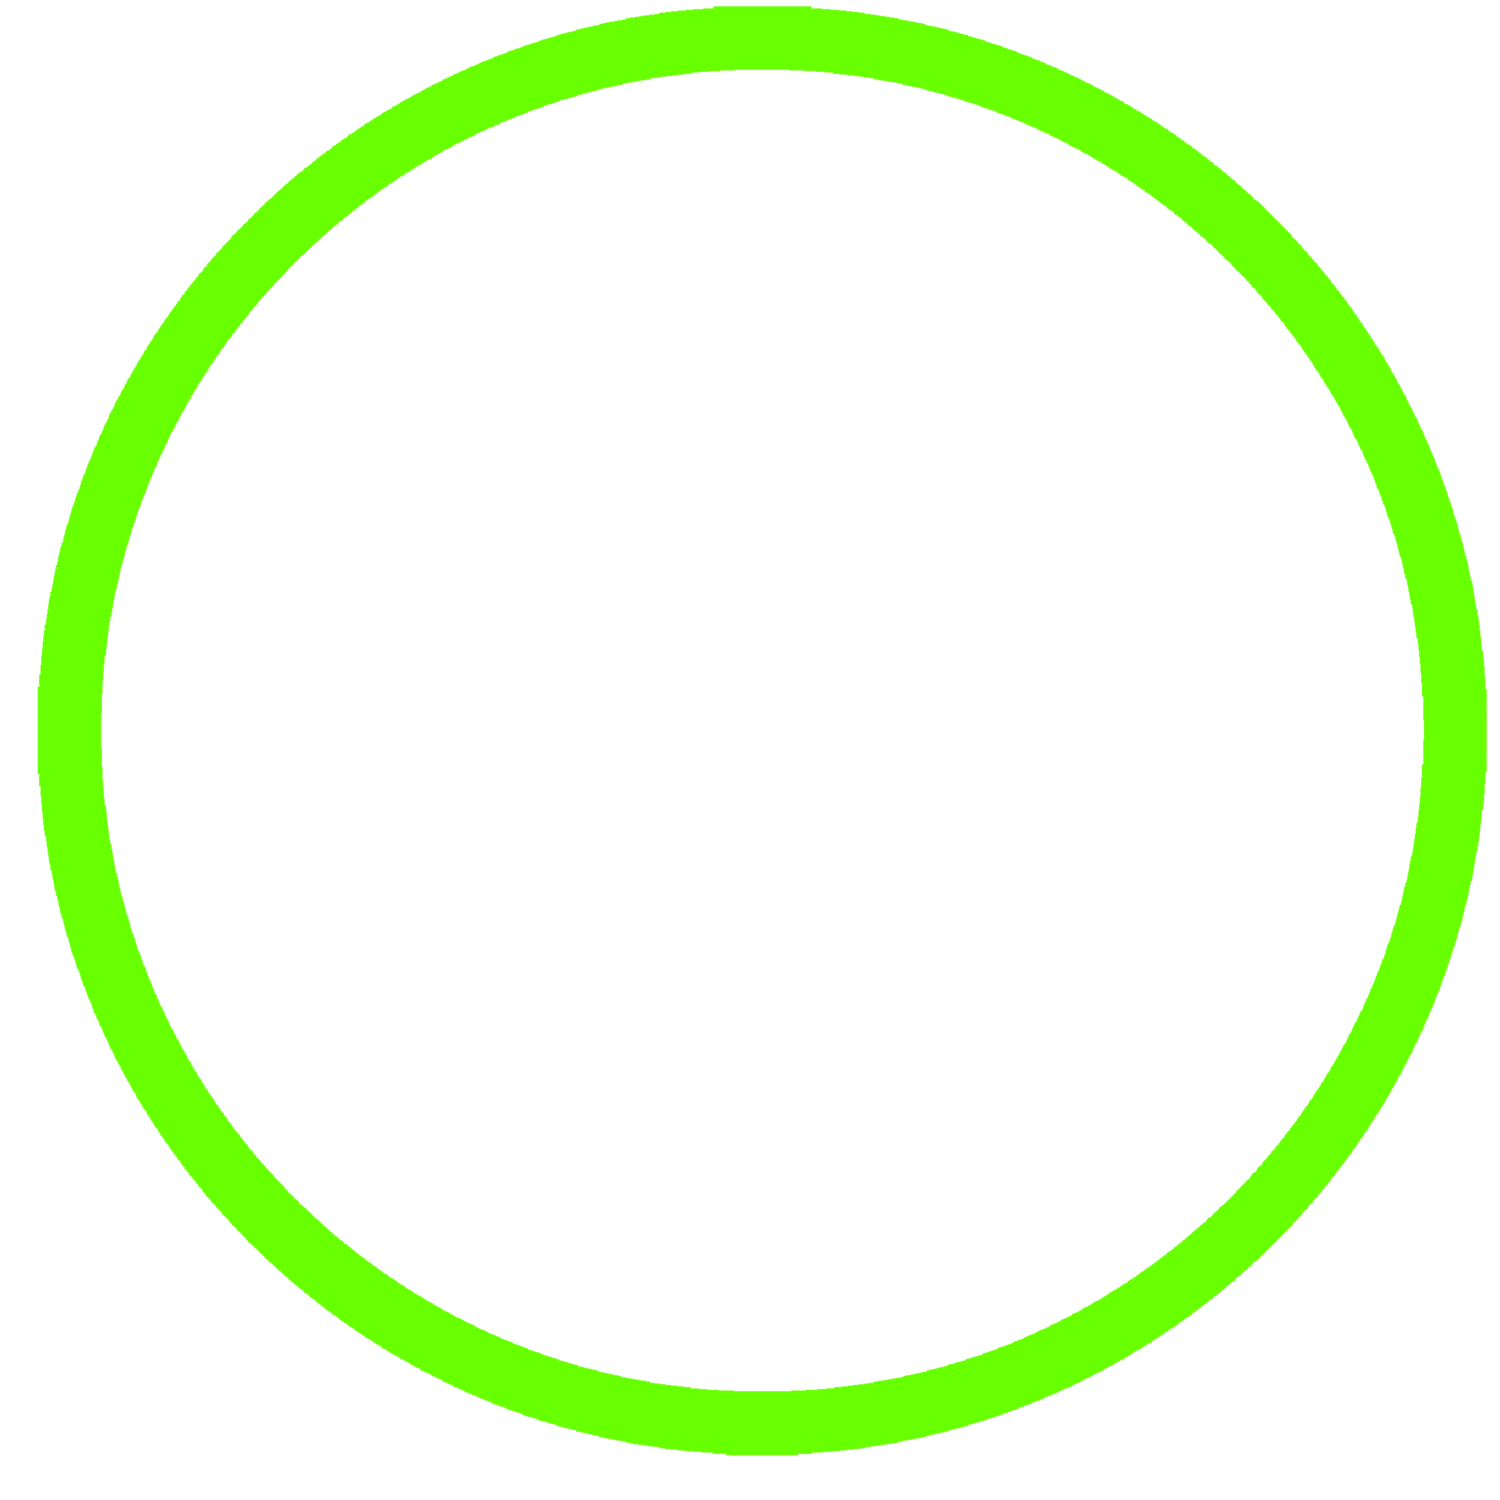 Evolve Coaching Systems